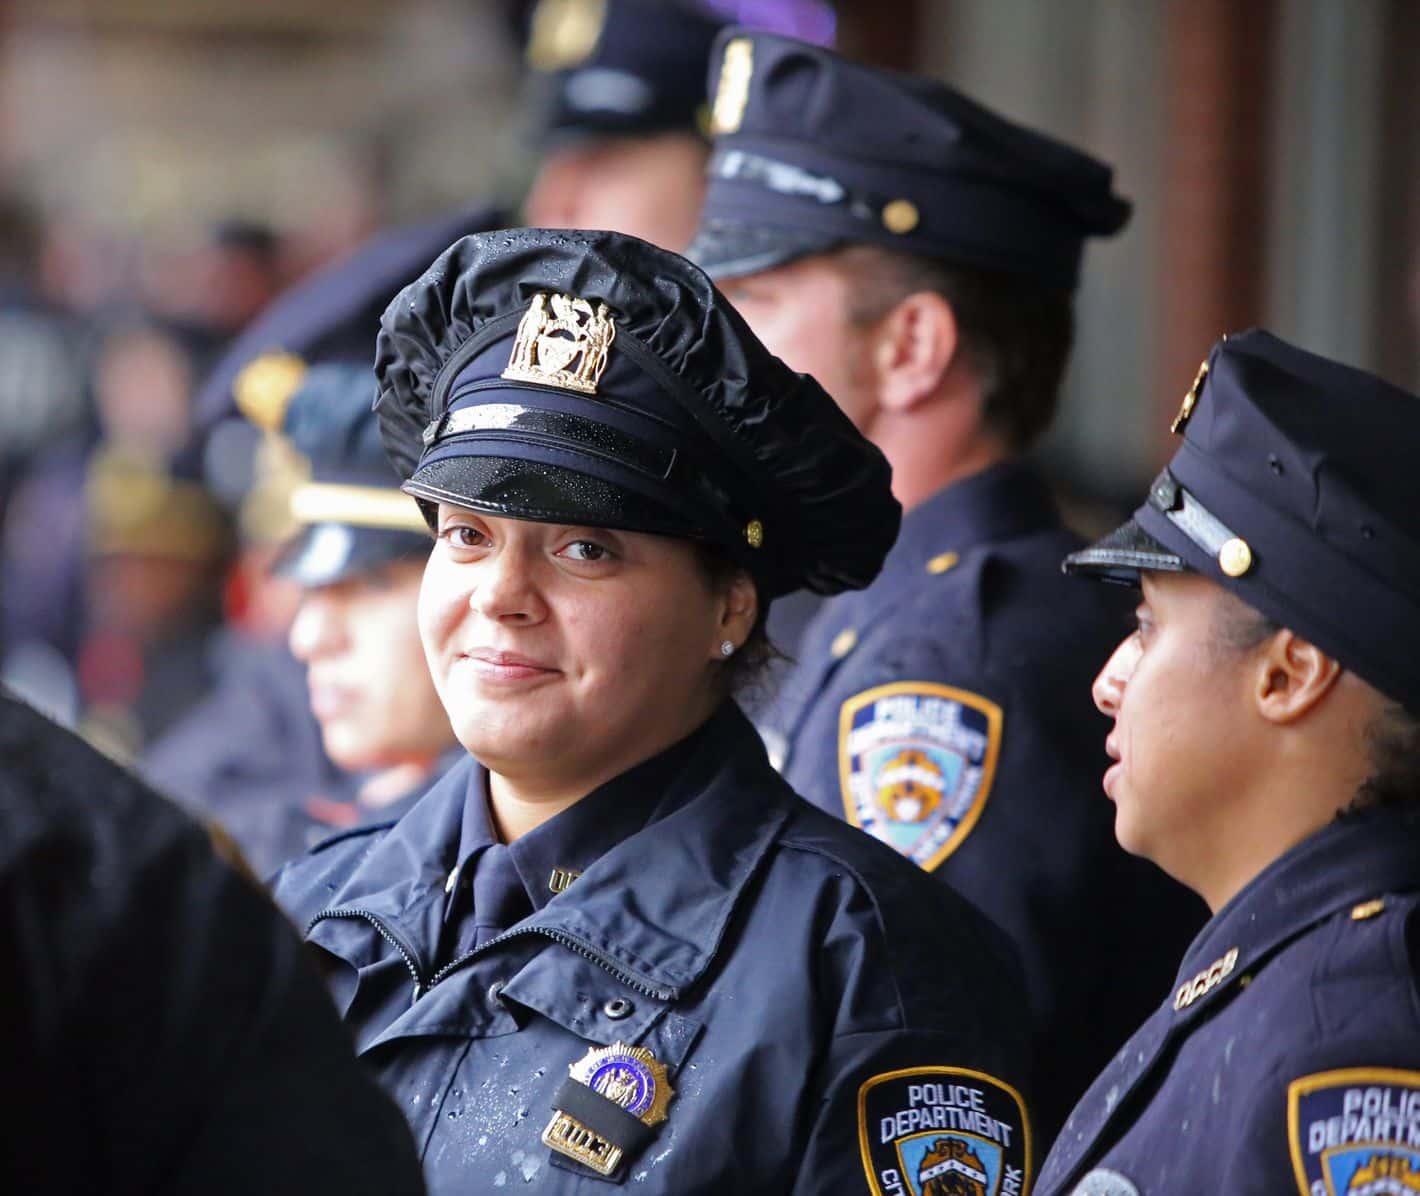 If You Want Less Police Violence, Hire More Female Cops